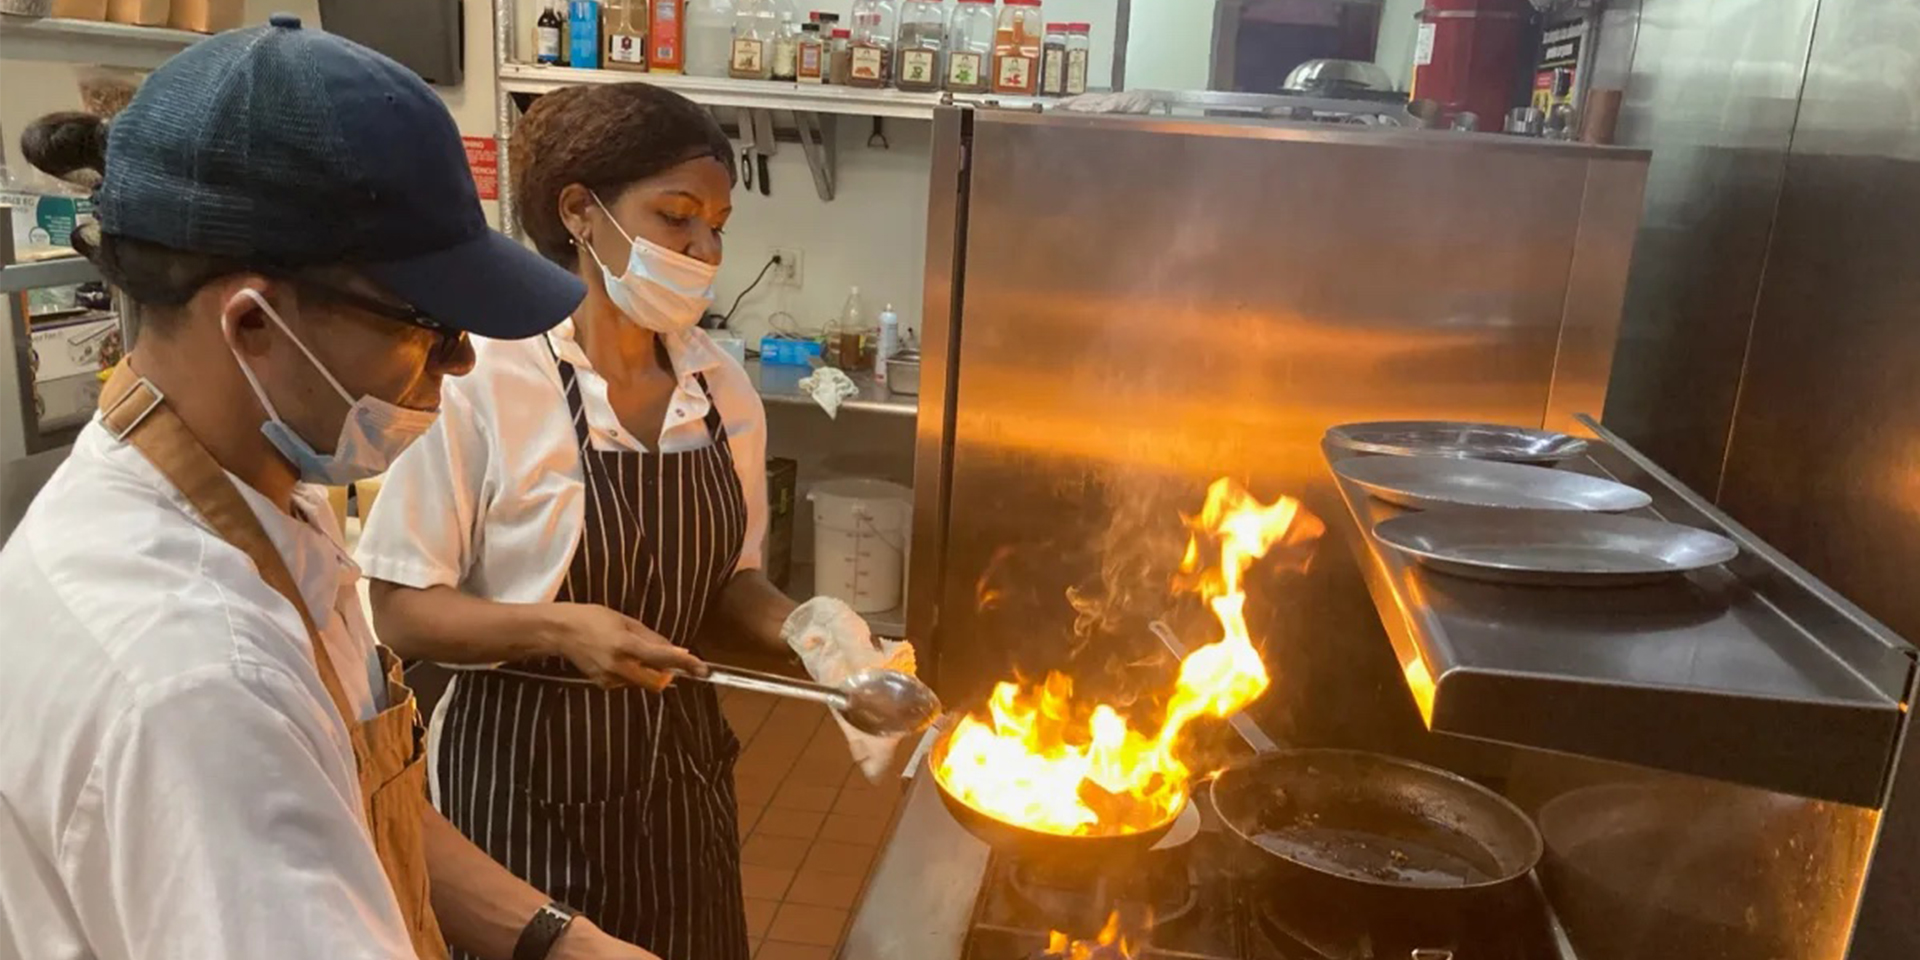 Cooks doing flambe on food in a restaurant kitchen.